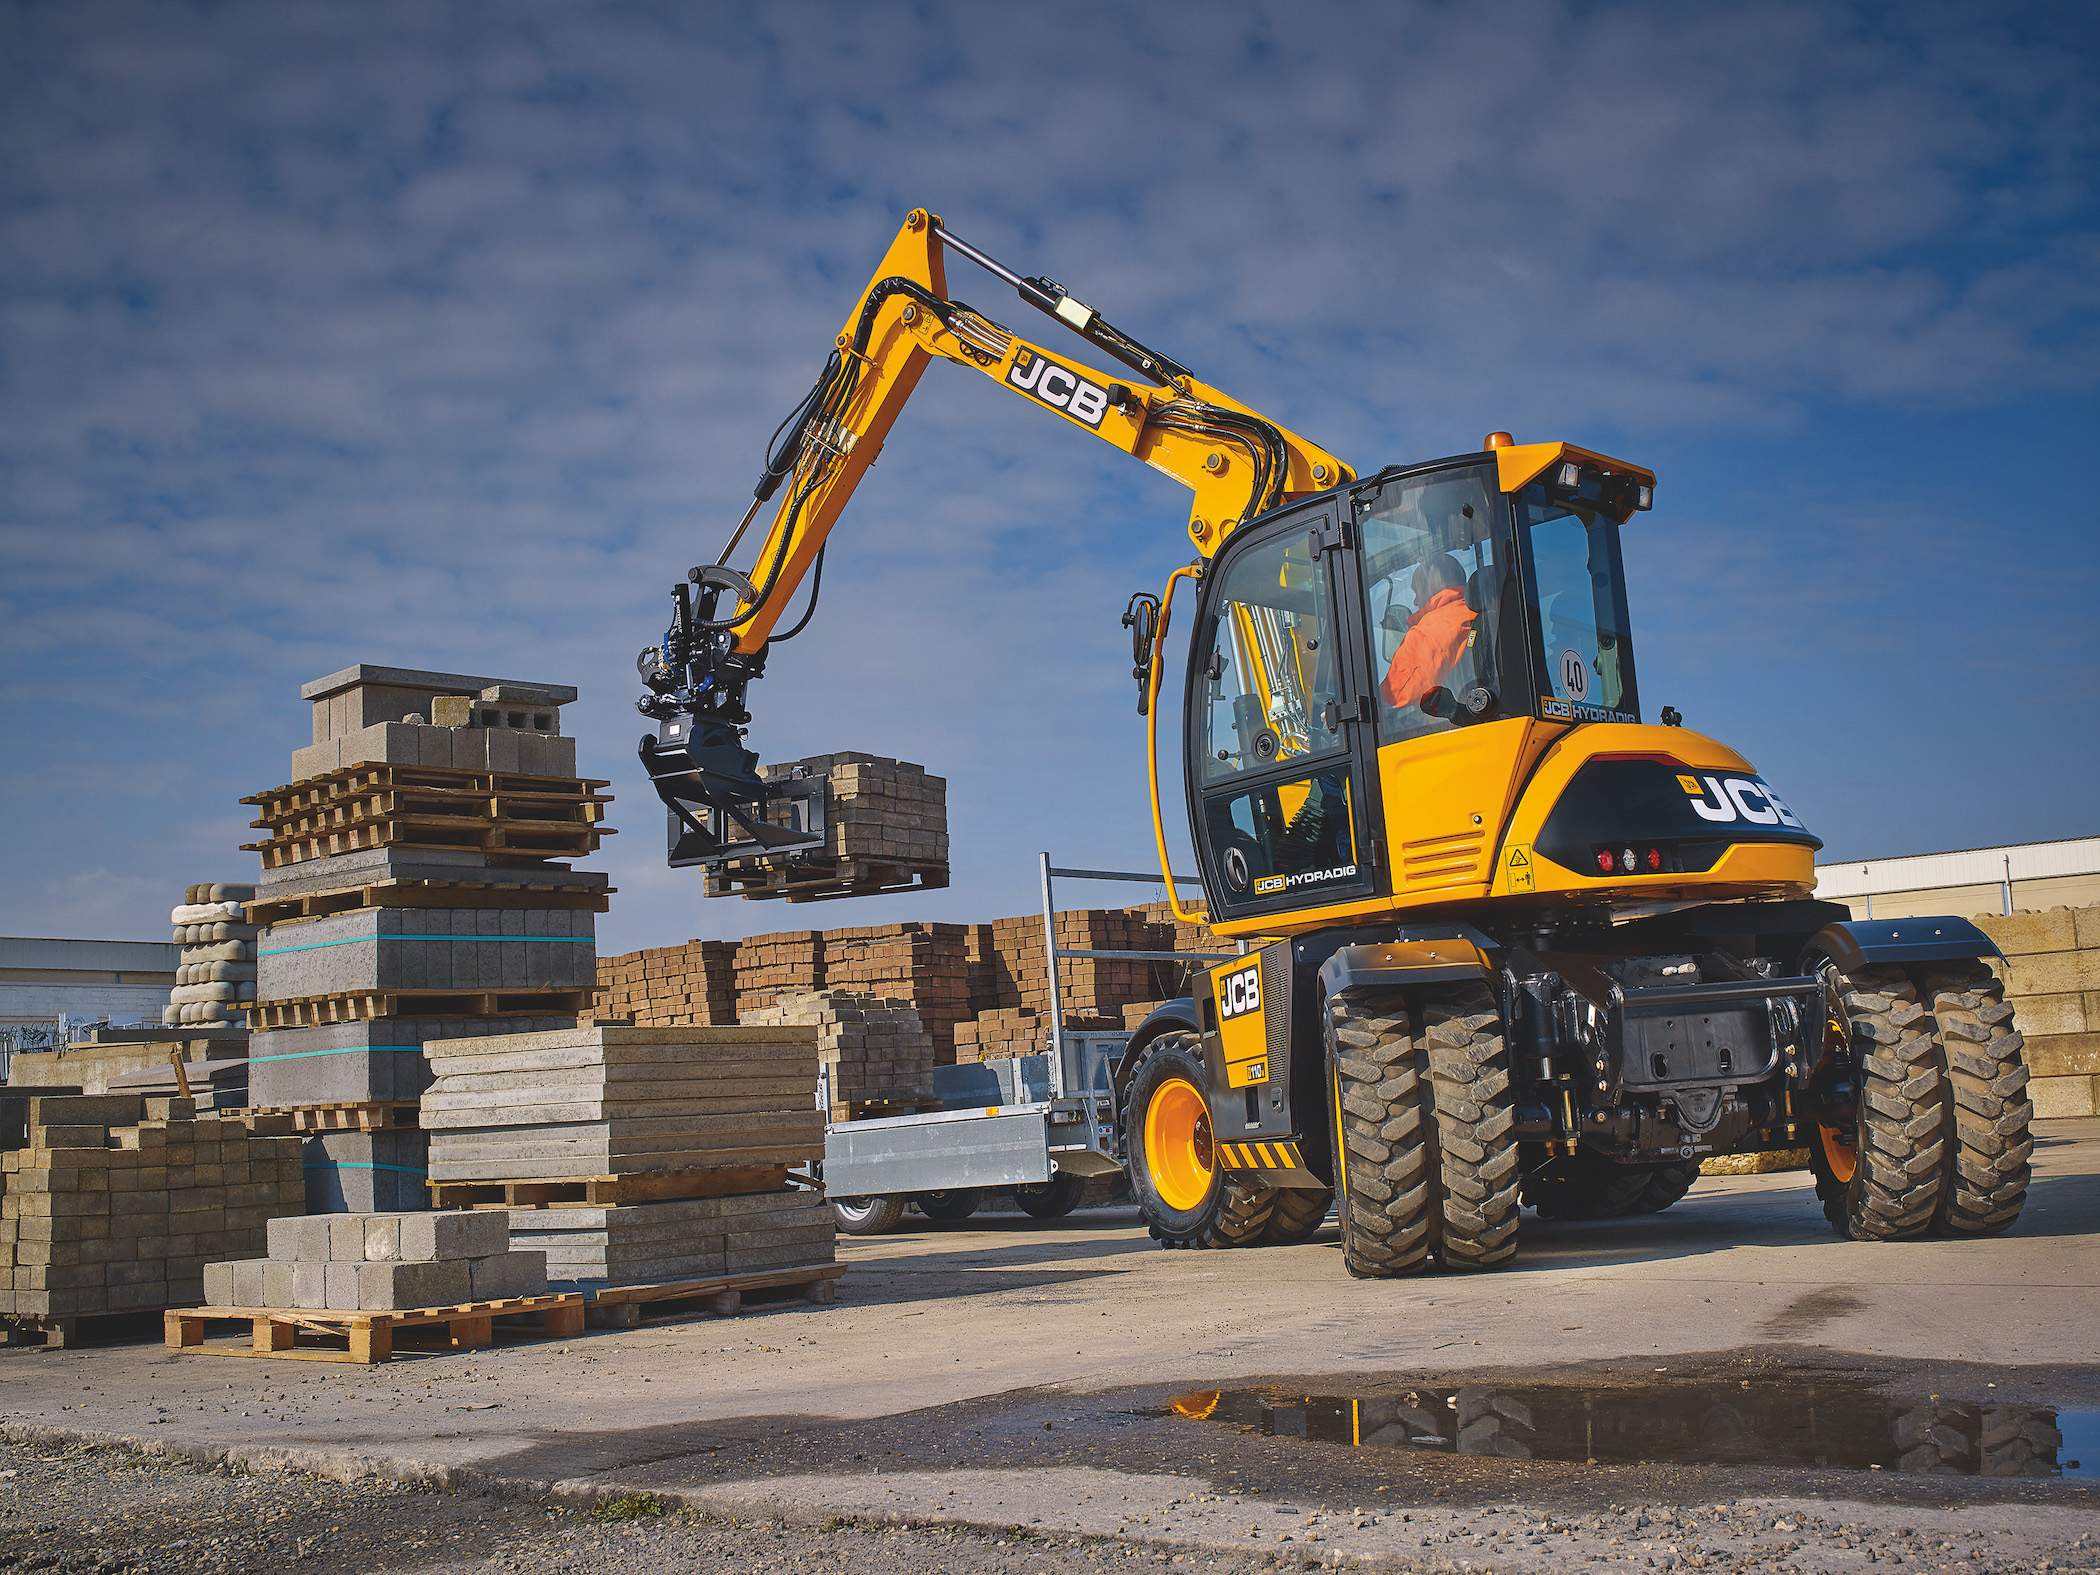 The JCB 110W Hydradig delivers unparalleled visibility, stability, maneuverability, mobility and serviceability for urban construction, highway maintenance and municipal contractors.